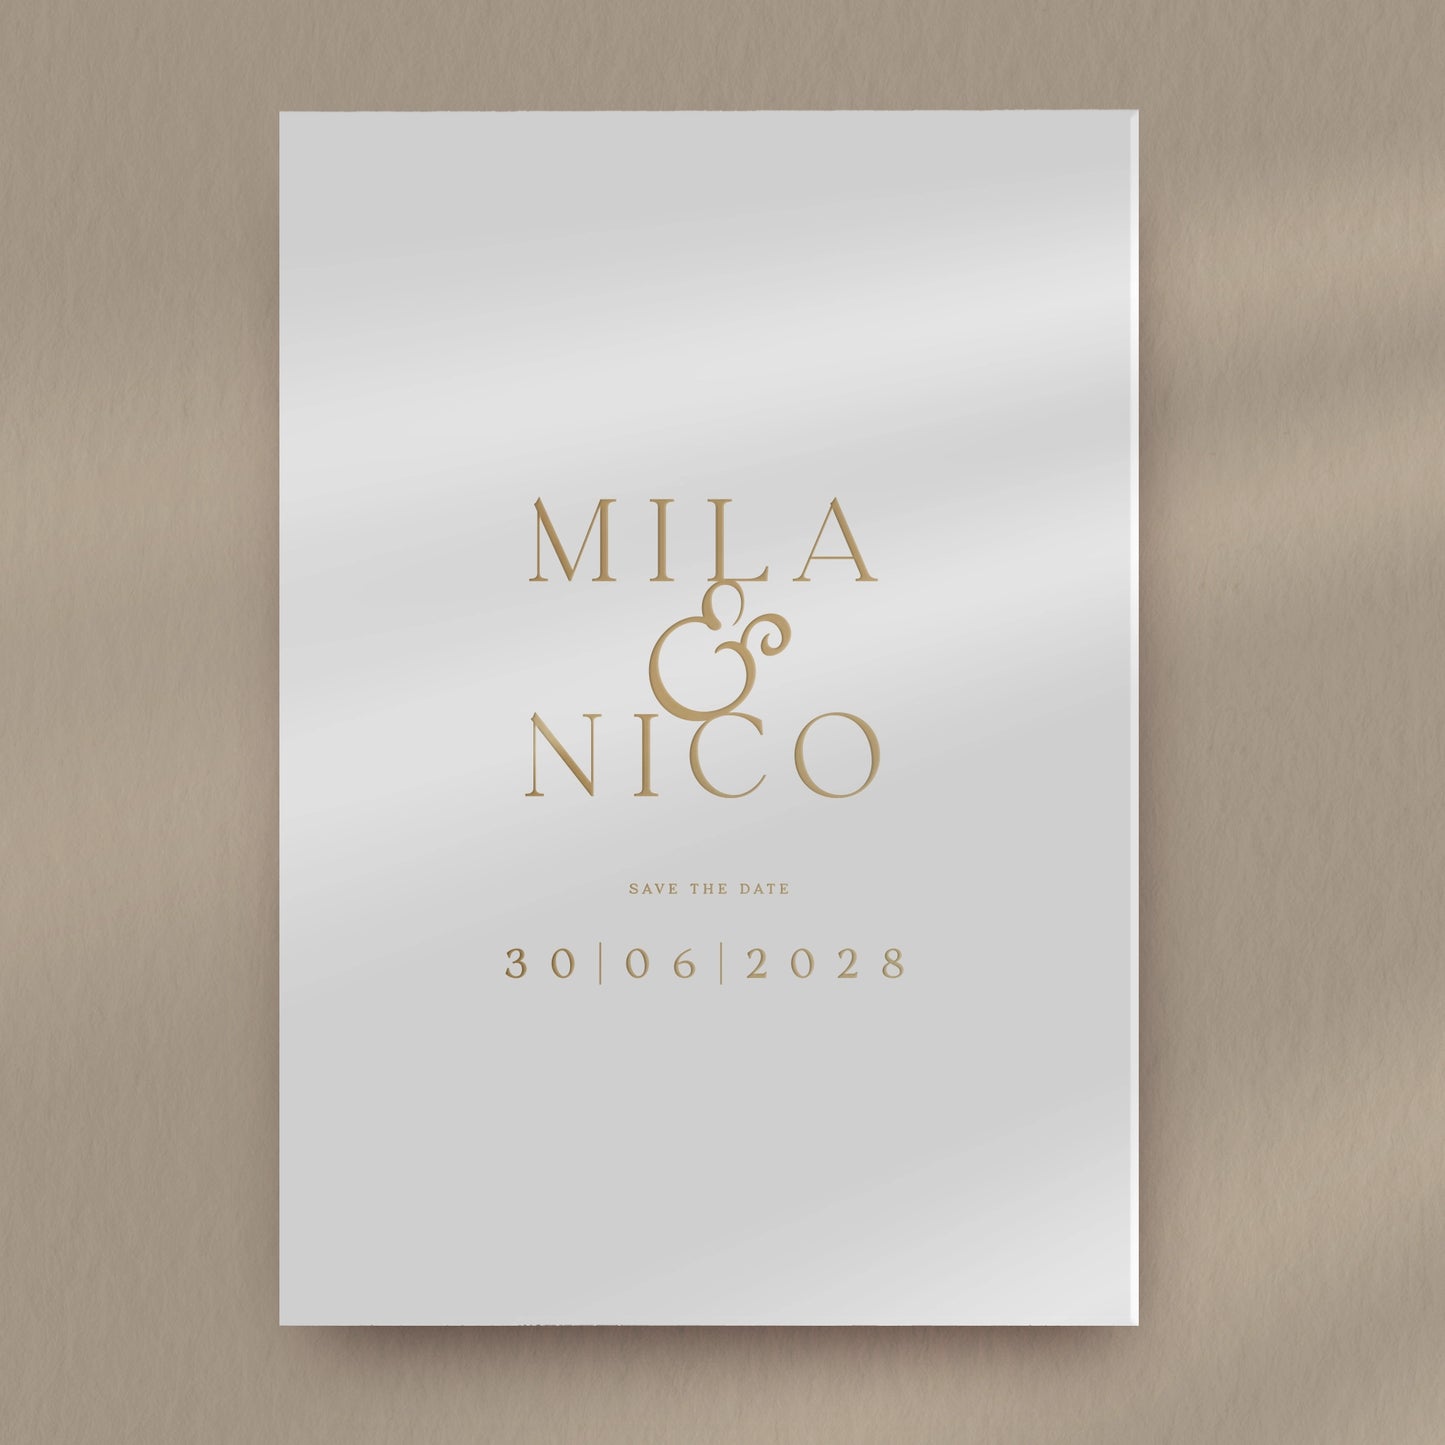 Save The Date Sample  Ivy and Gold Wedding Stationery Mila  